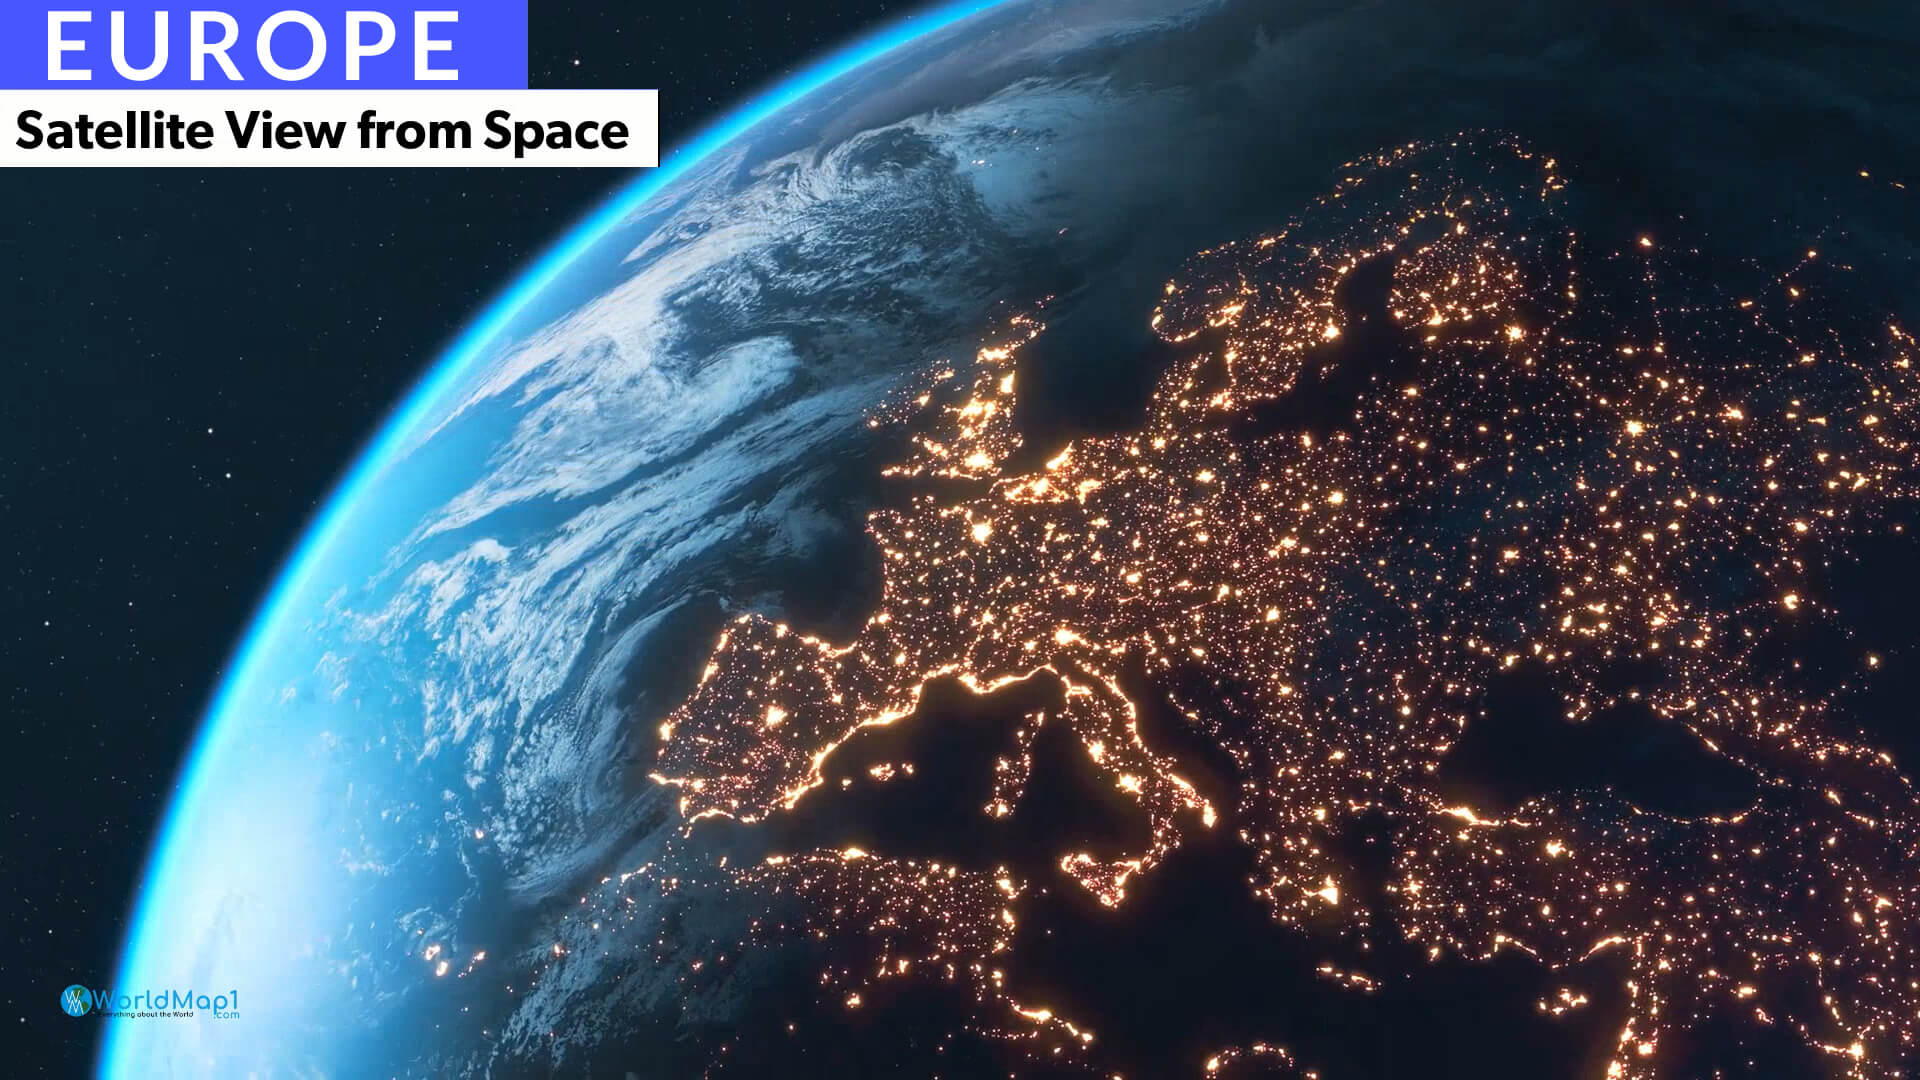 Europe and Earth Satellite View from Space